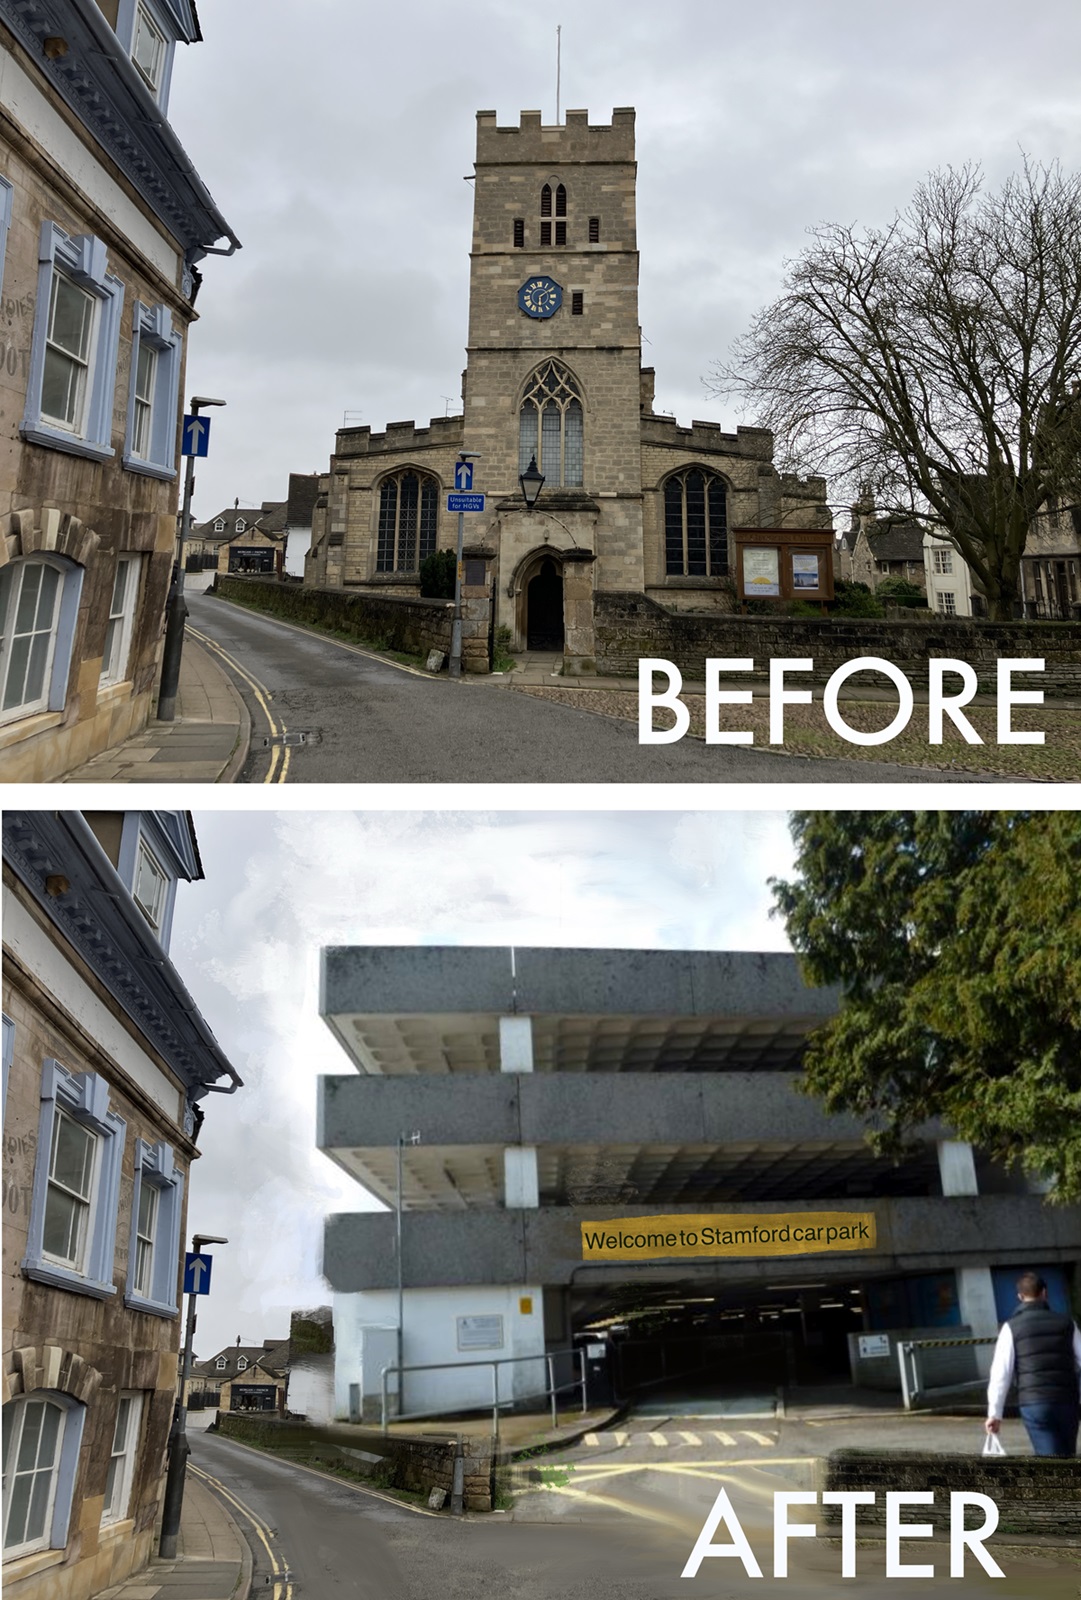 Before and after image showing the church and the replacement car park